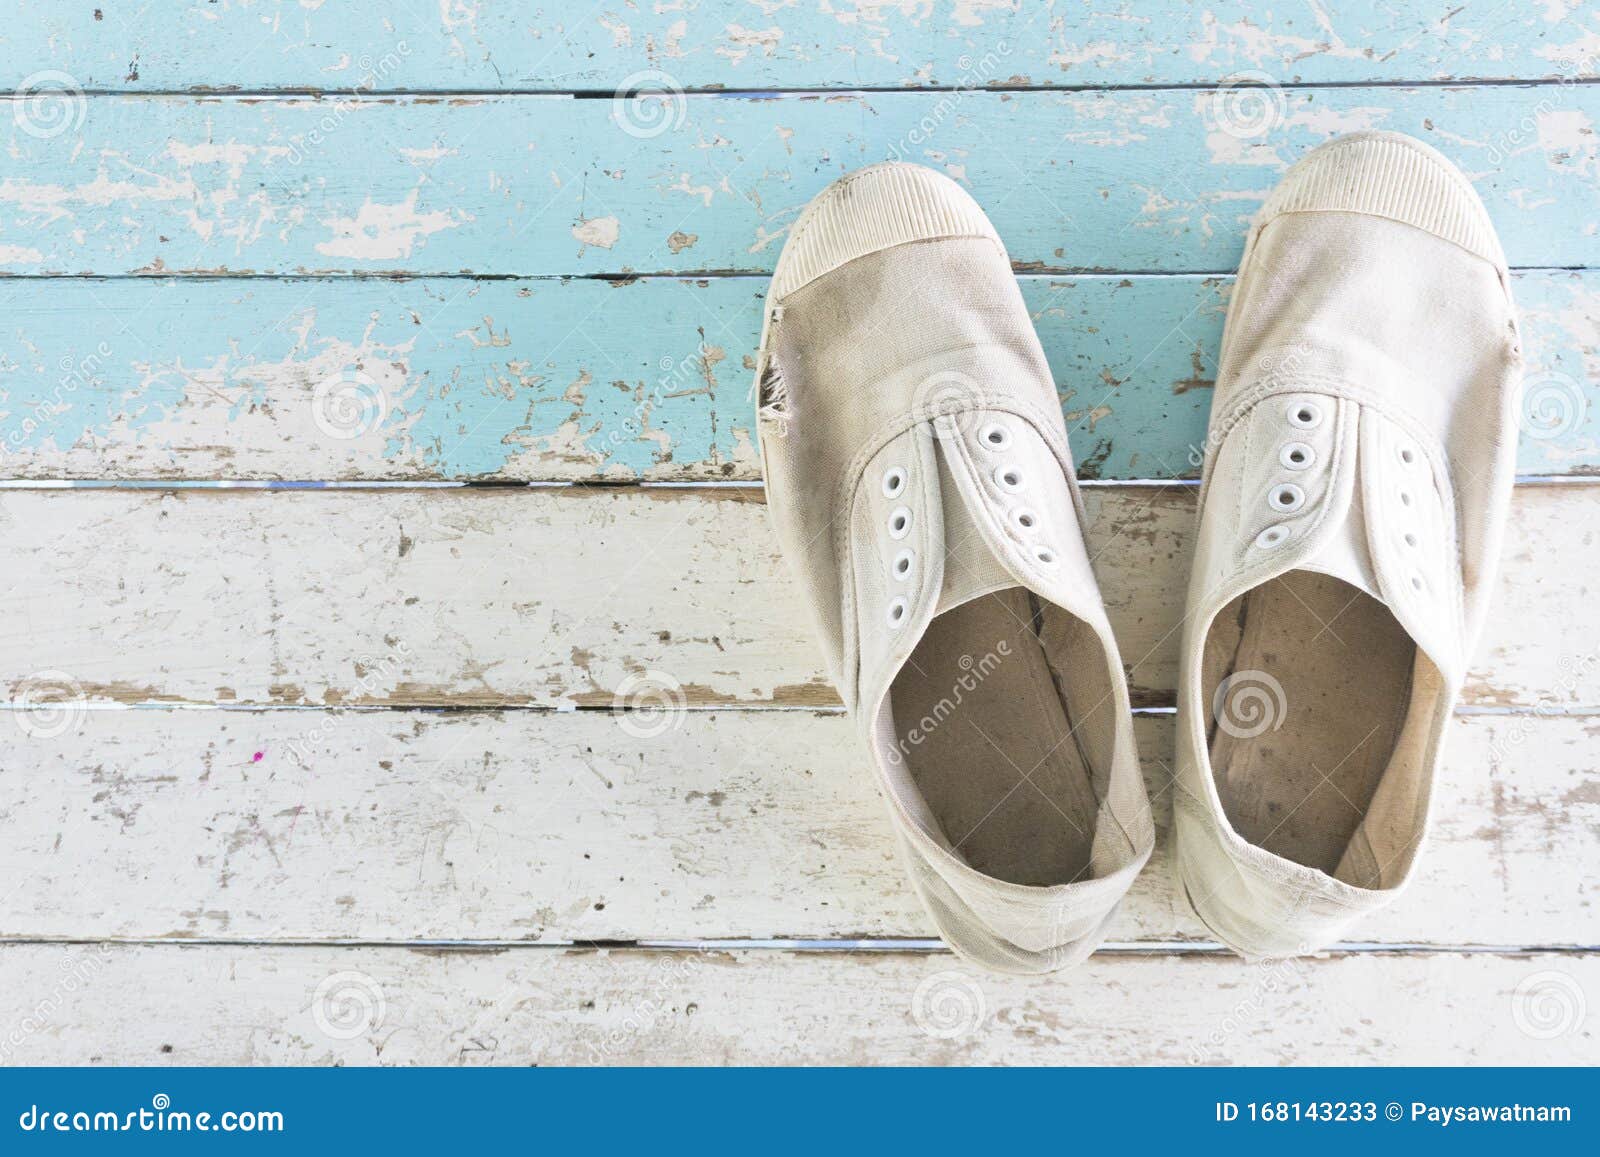 Old White Color Sneakers on Old Vintage Wooden. the Shoe on the Left ...